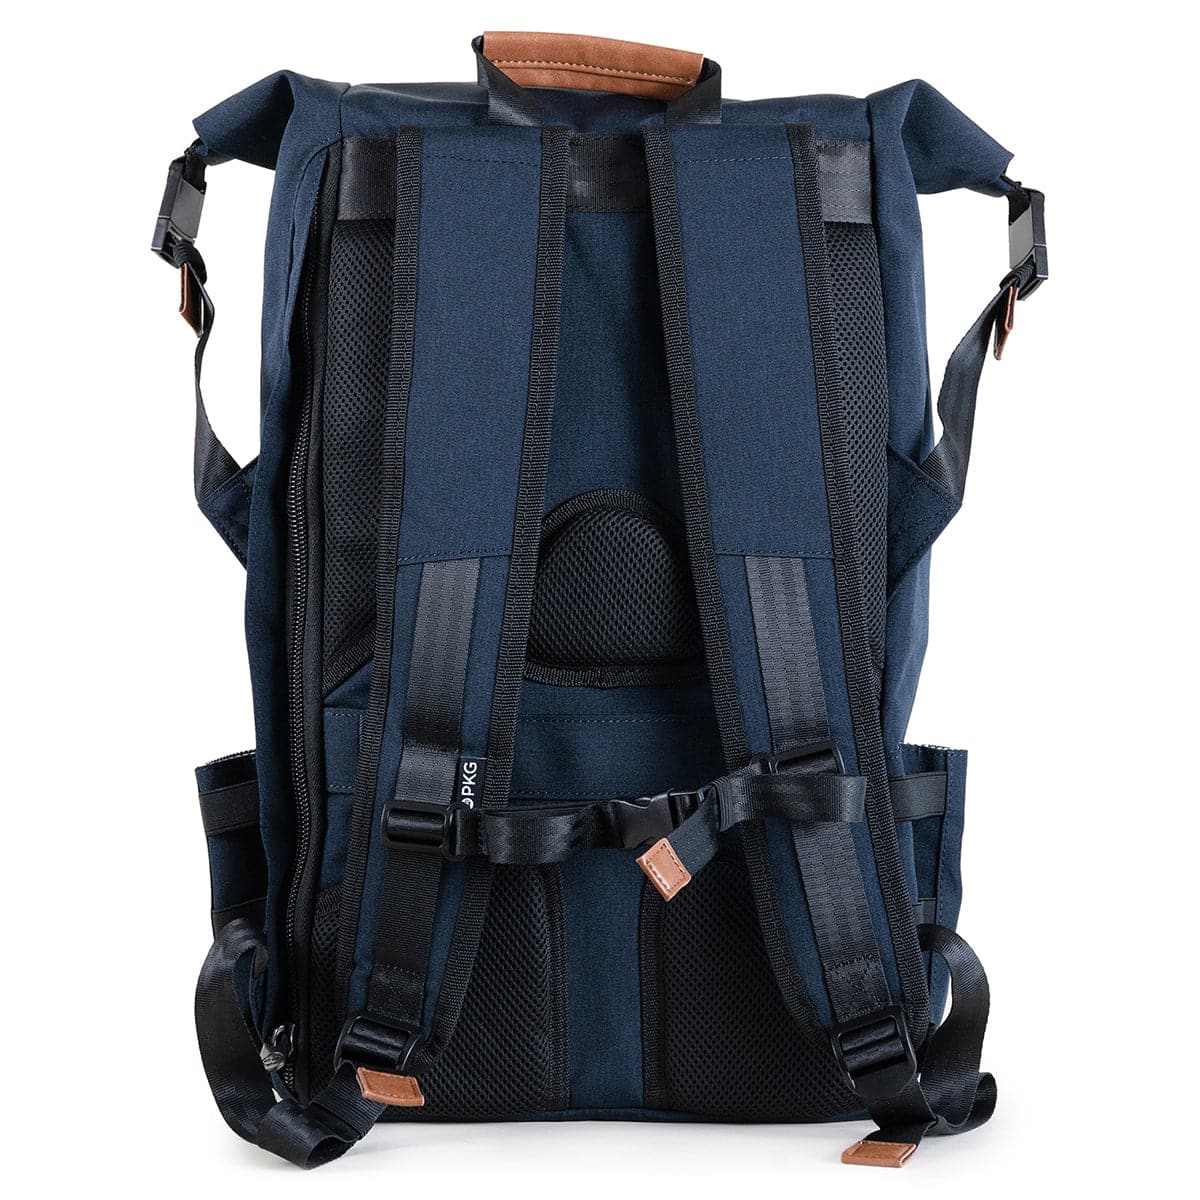 PKG Dawson Recycled Backpack